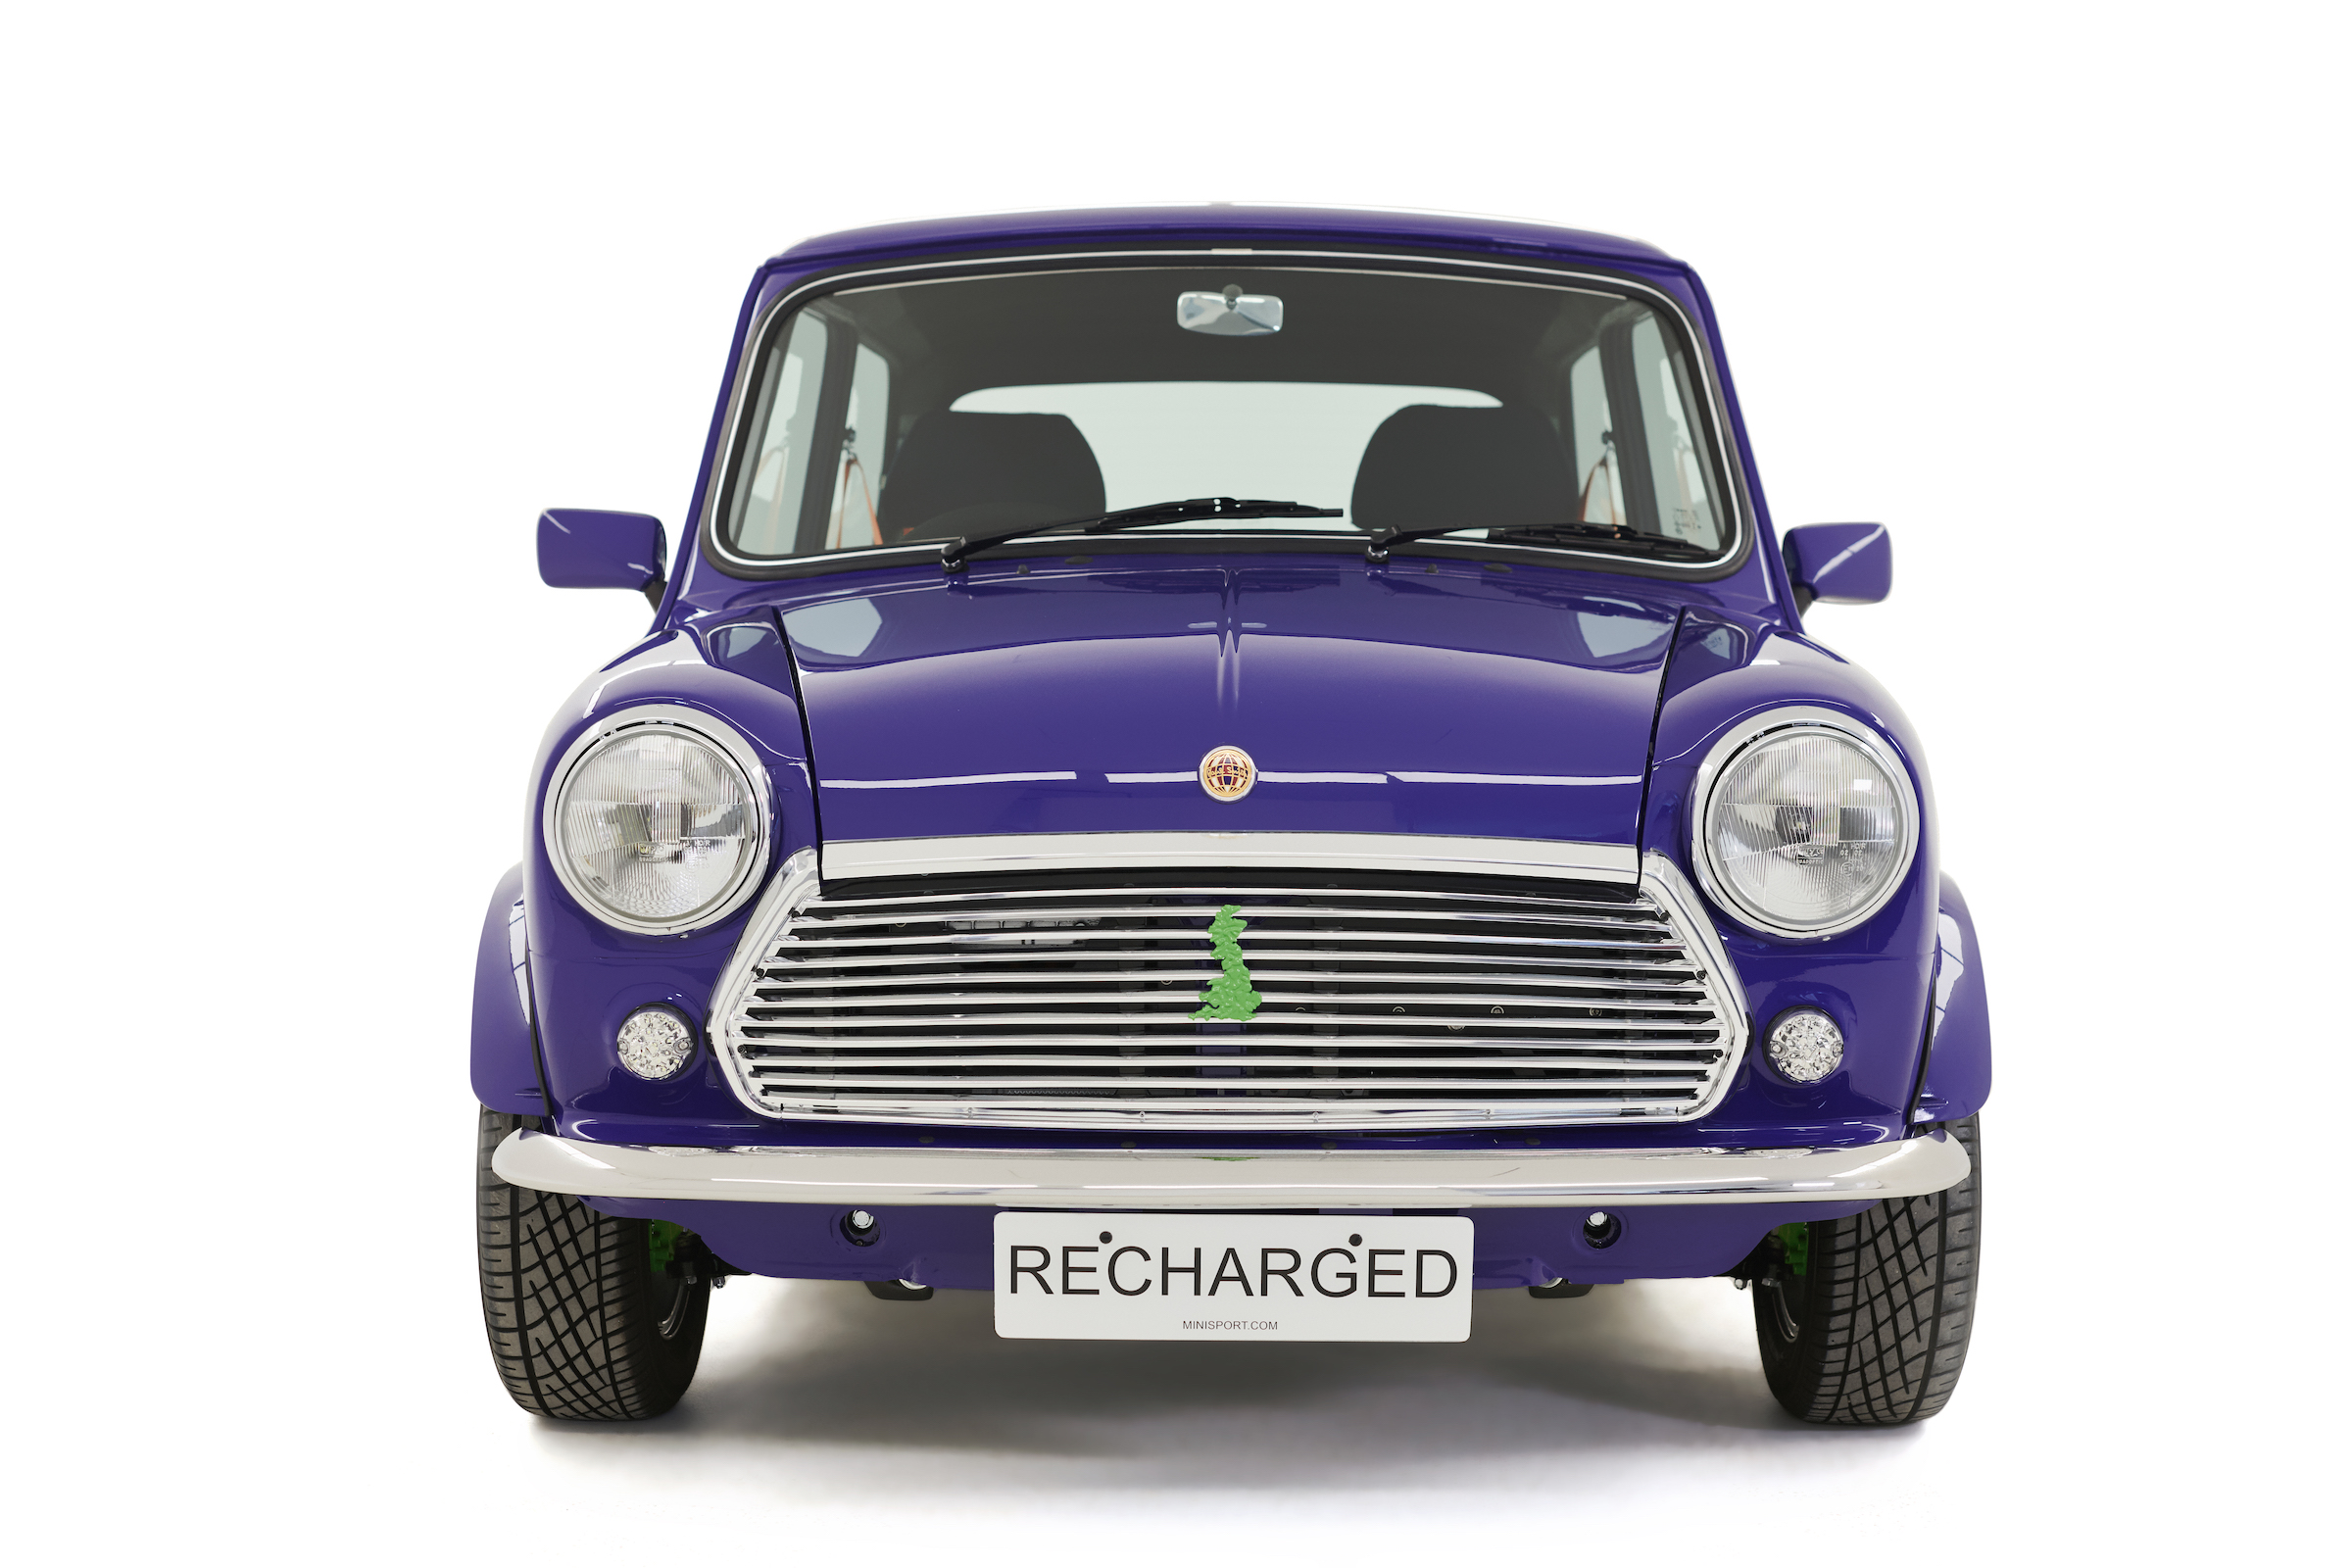 1990s Paul Smith Mini special edition gets an electric twist